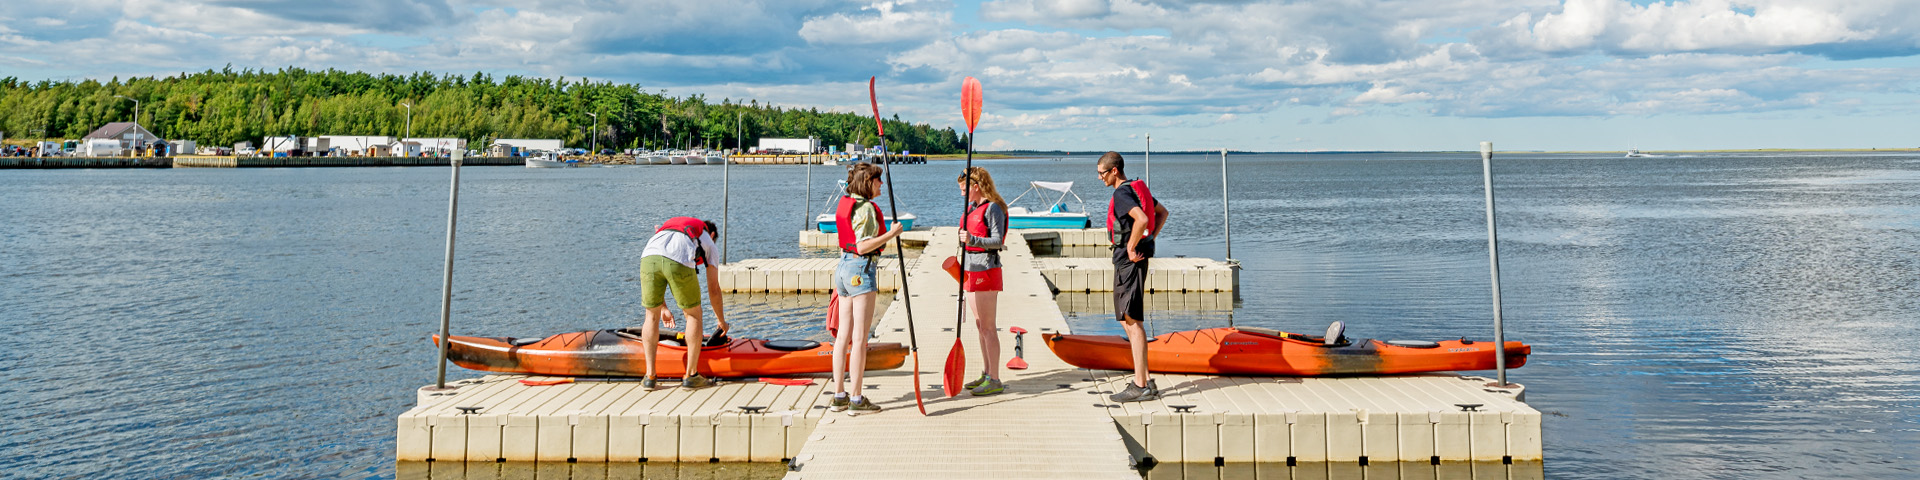 Visitors on a floating dock, with kayaks in the water.